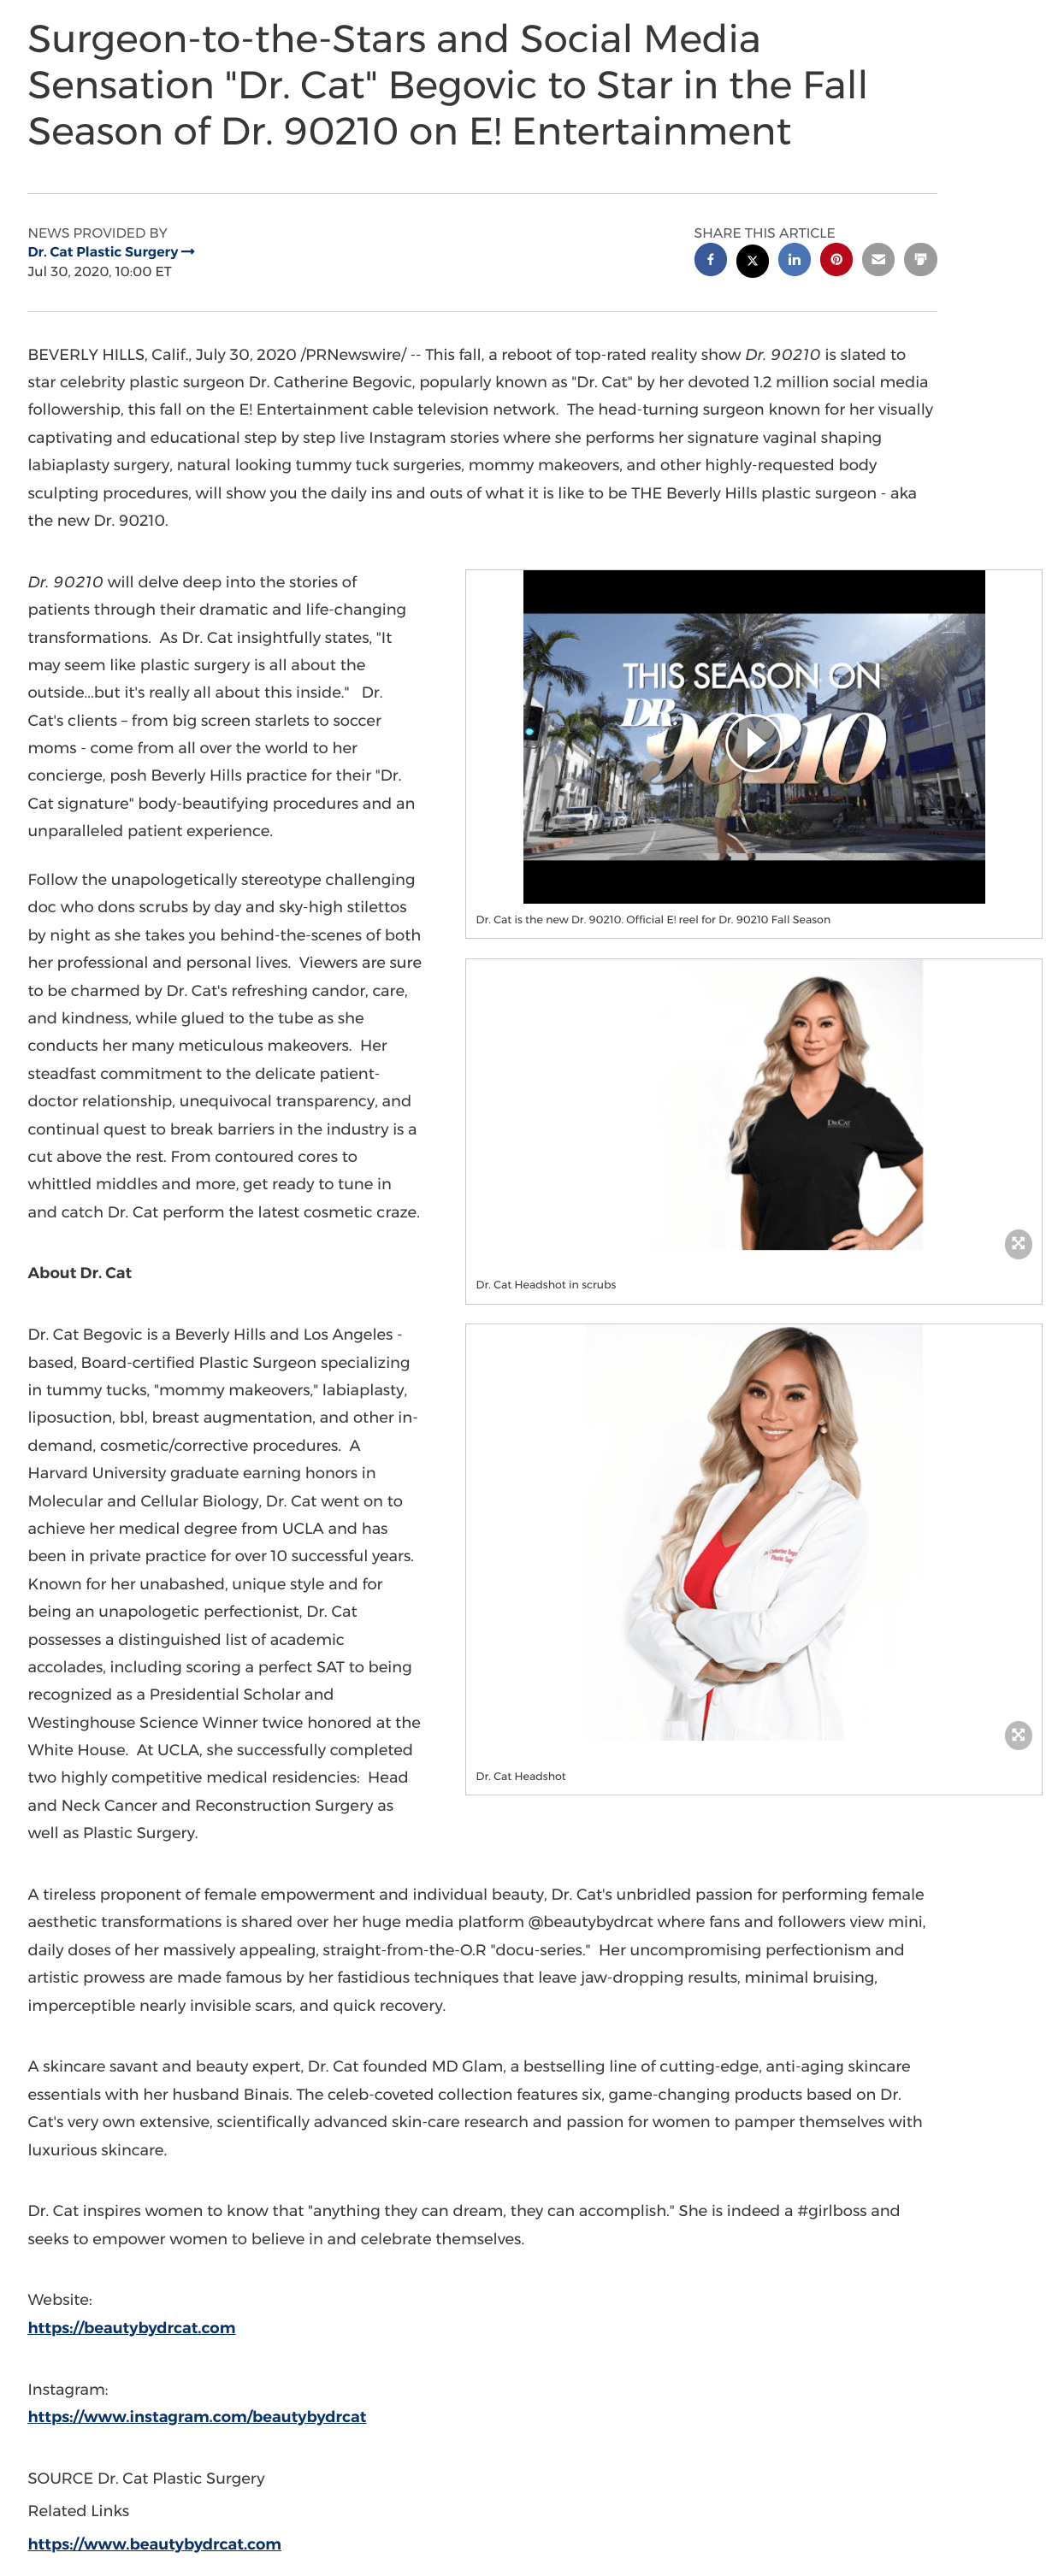 Screenshot of a press release announcing Dr. Cat Begovic's appearance in the fall season of 'Dr. 90210' on E! Entertainment